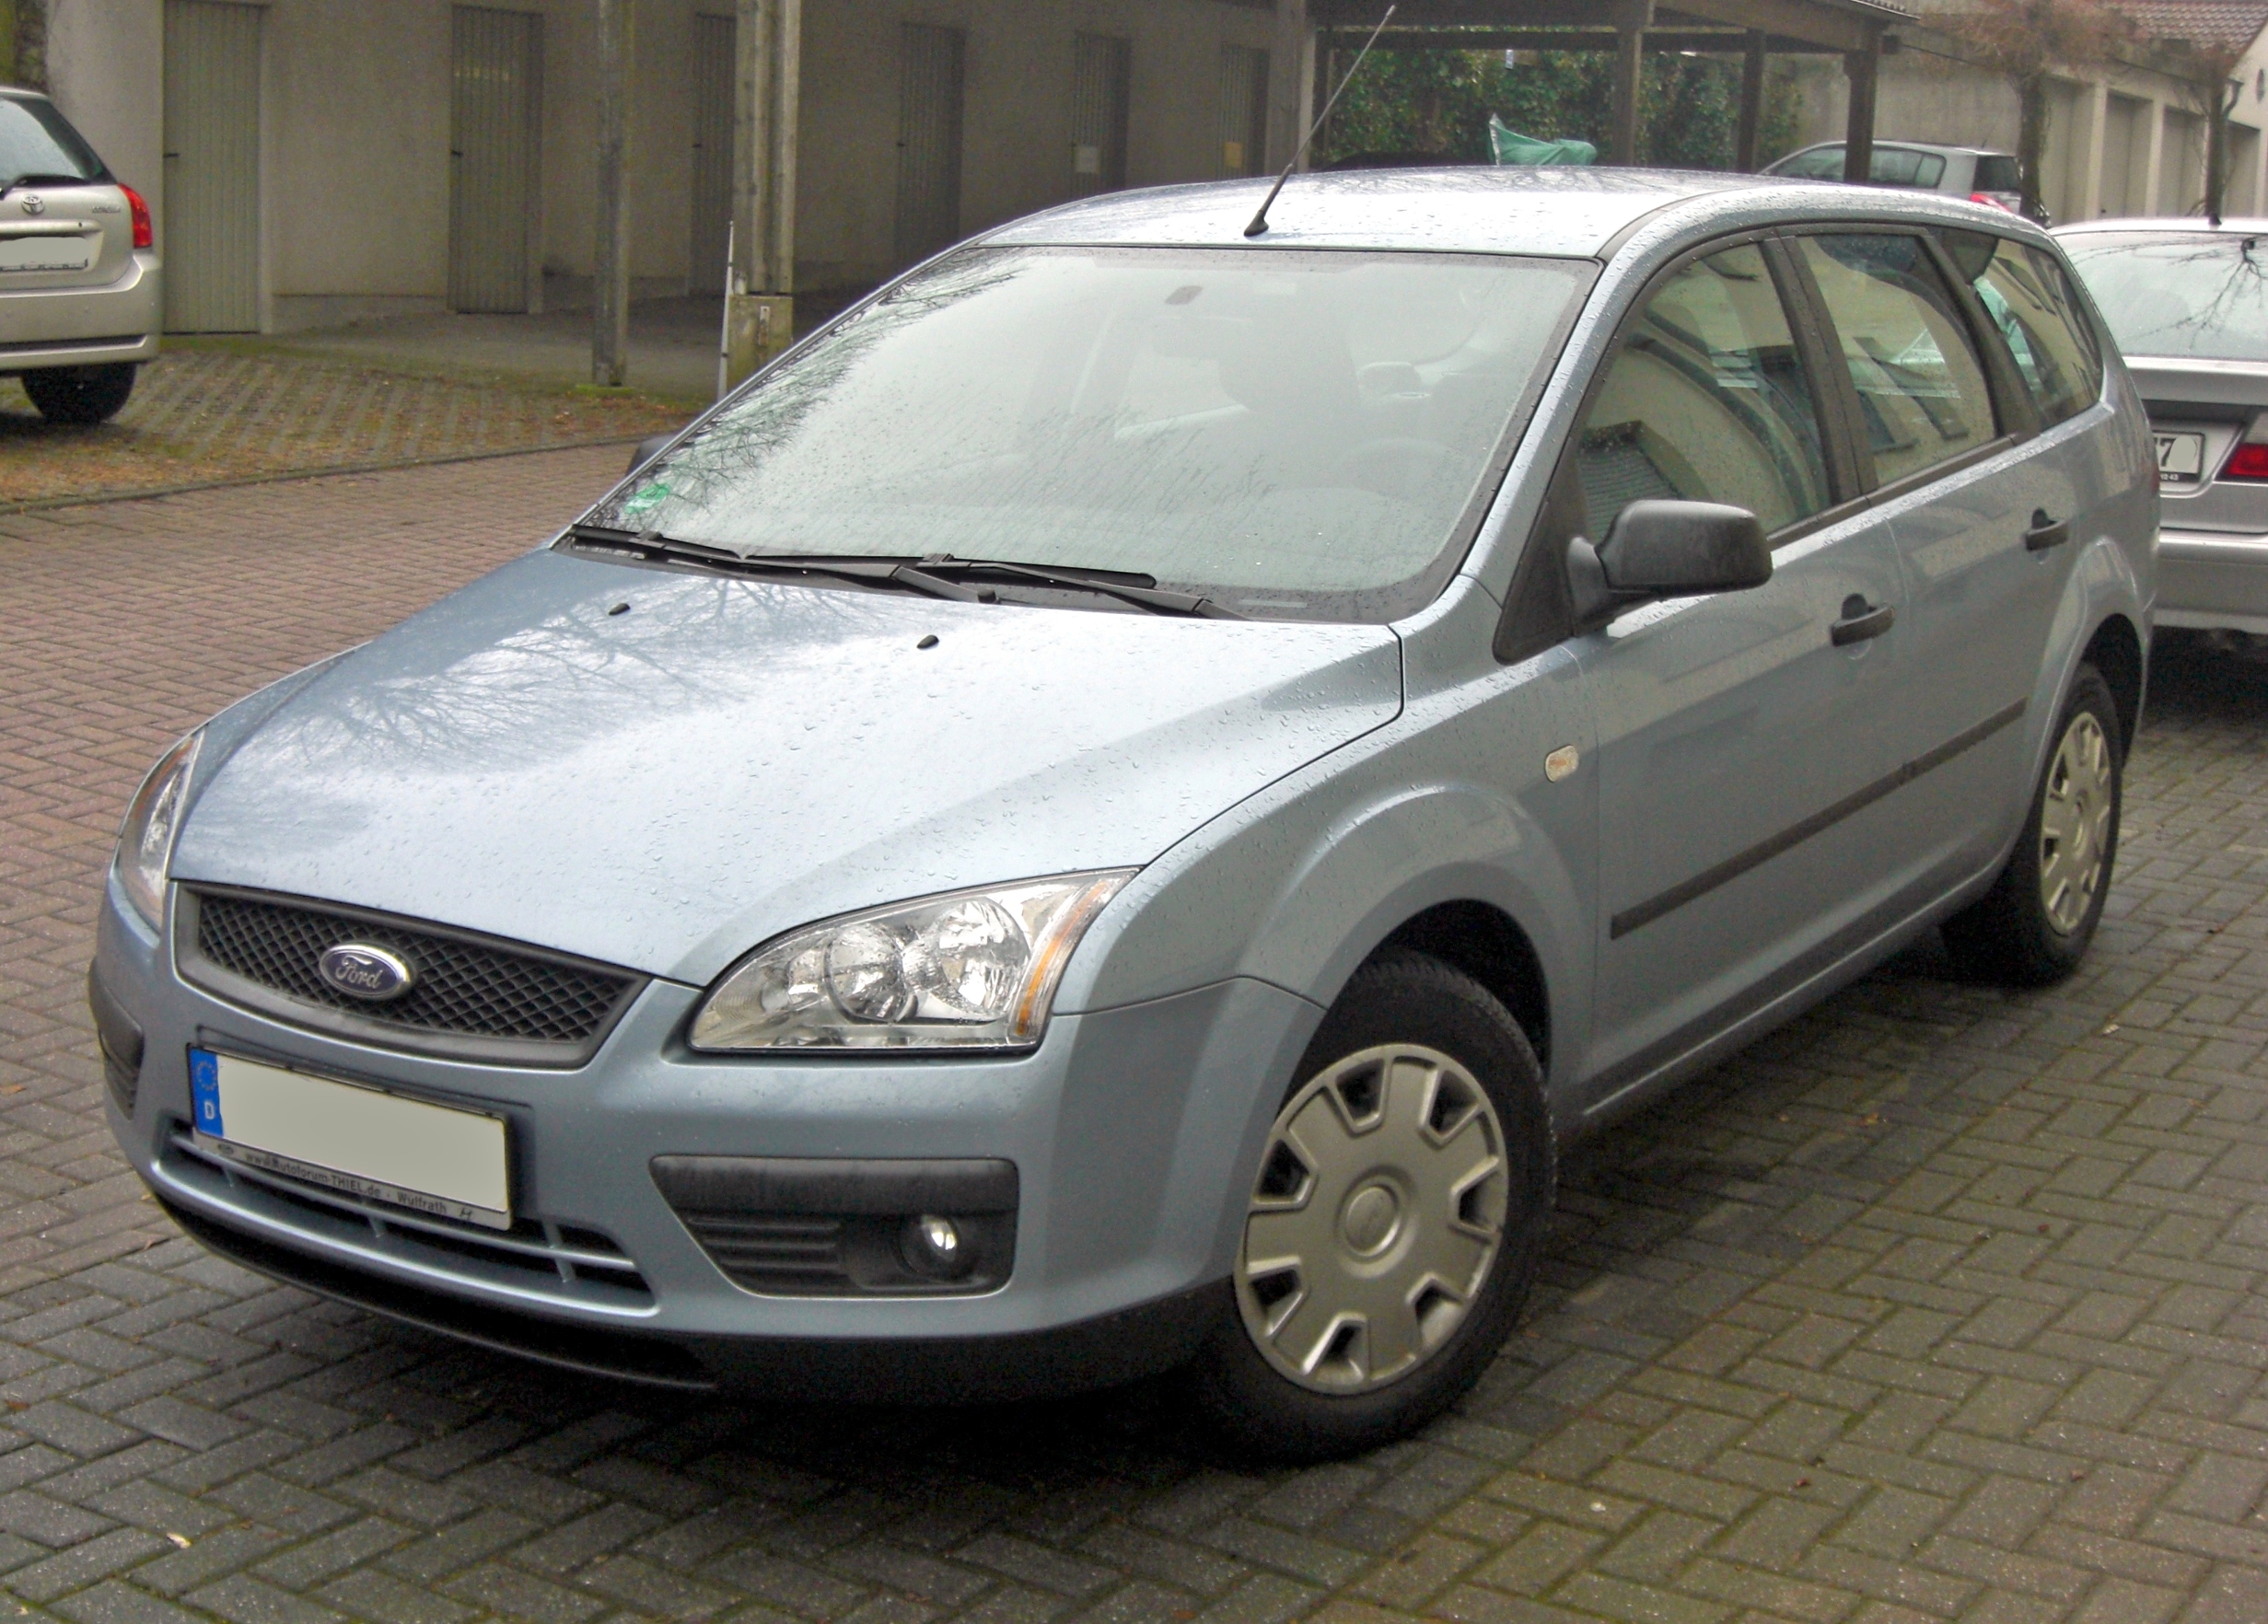 Ford focus 1.6 ti-vct motor tuning #4